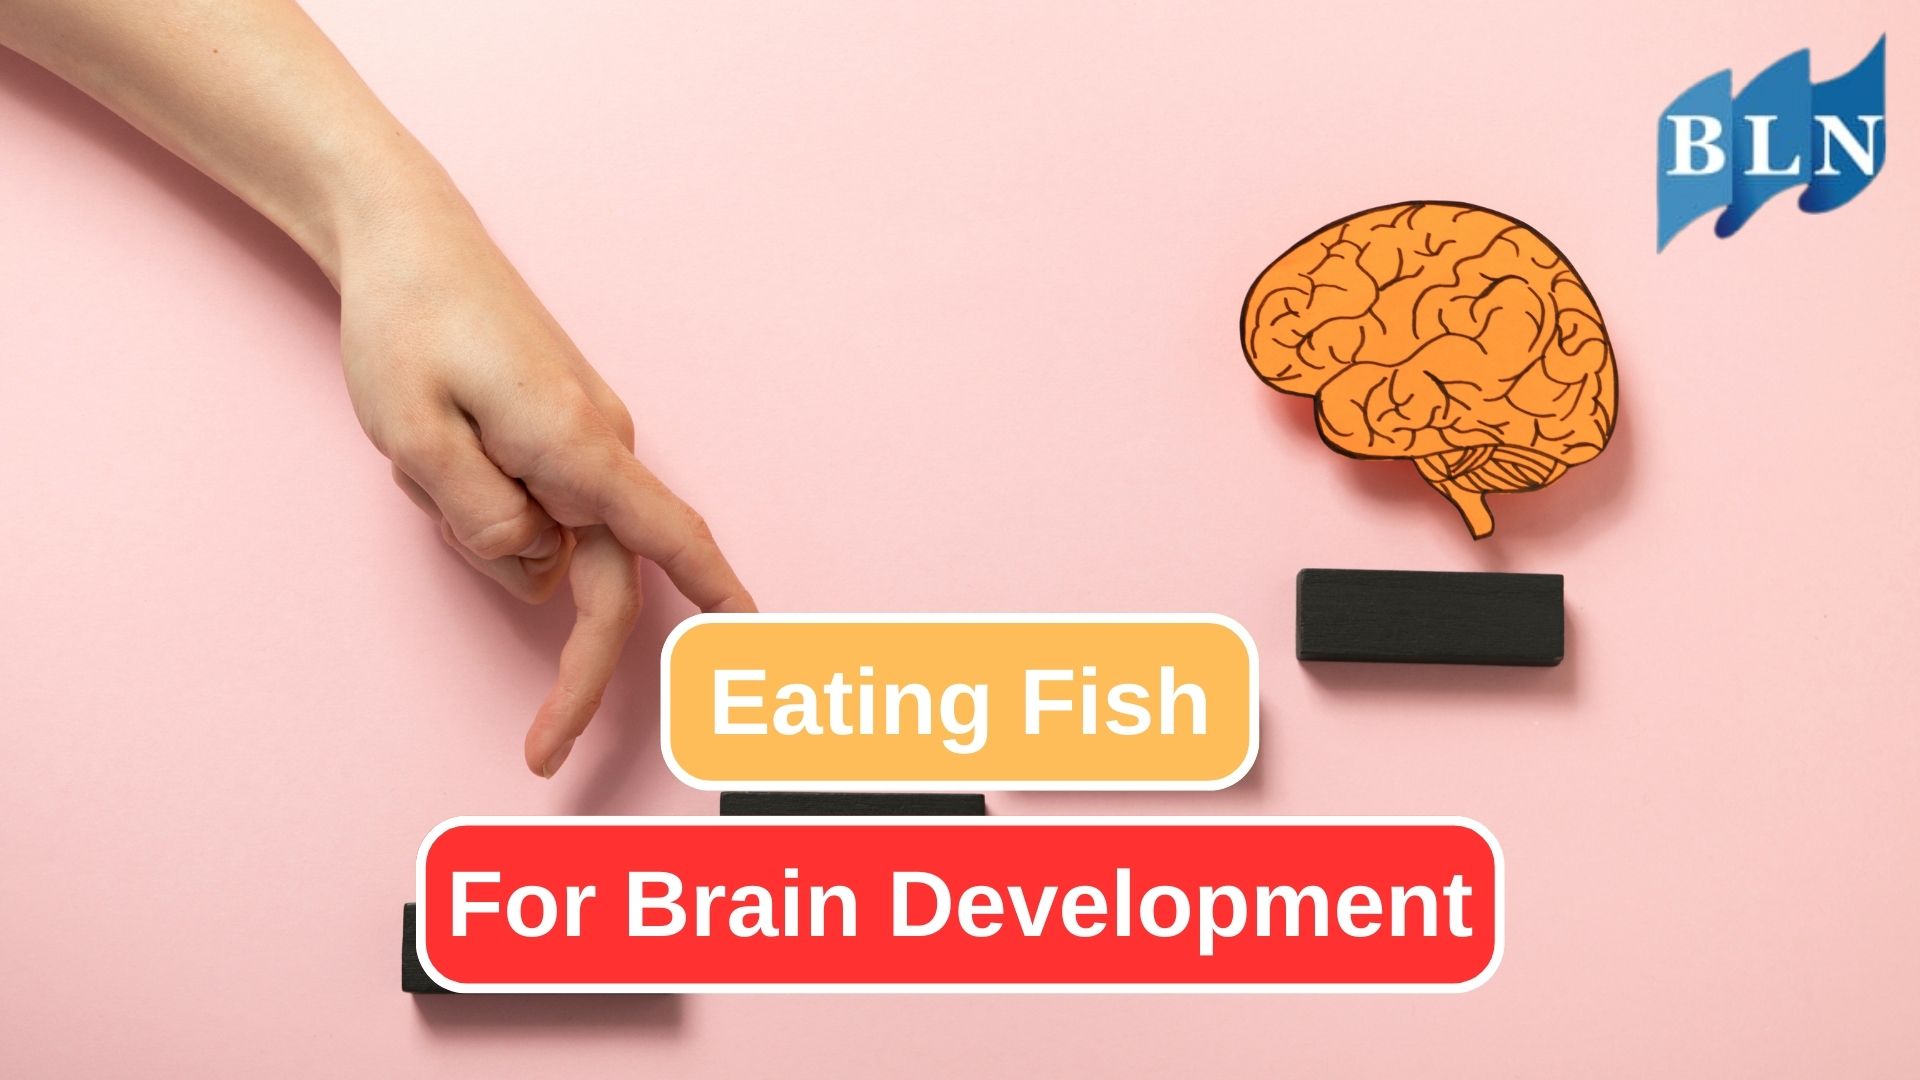 8 Reasons Why Eating Fish Is Good for Brain Development